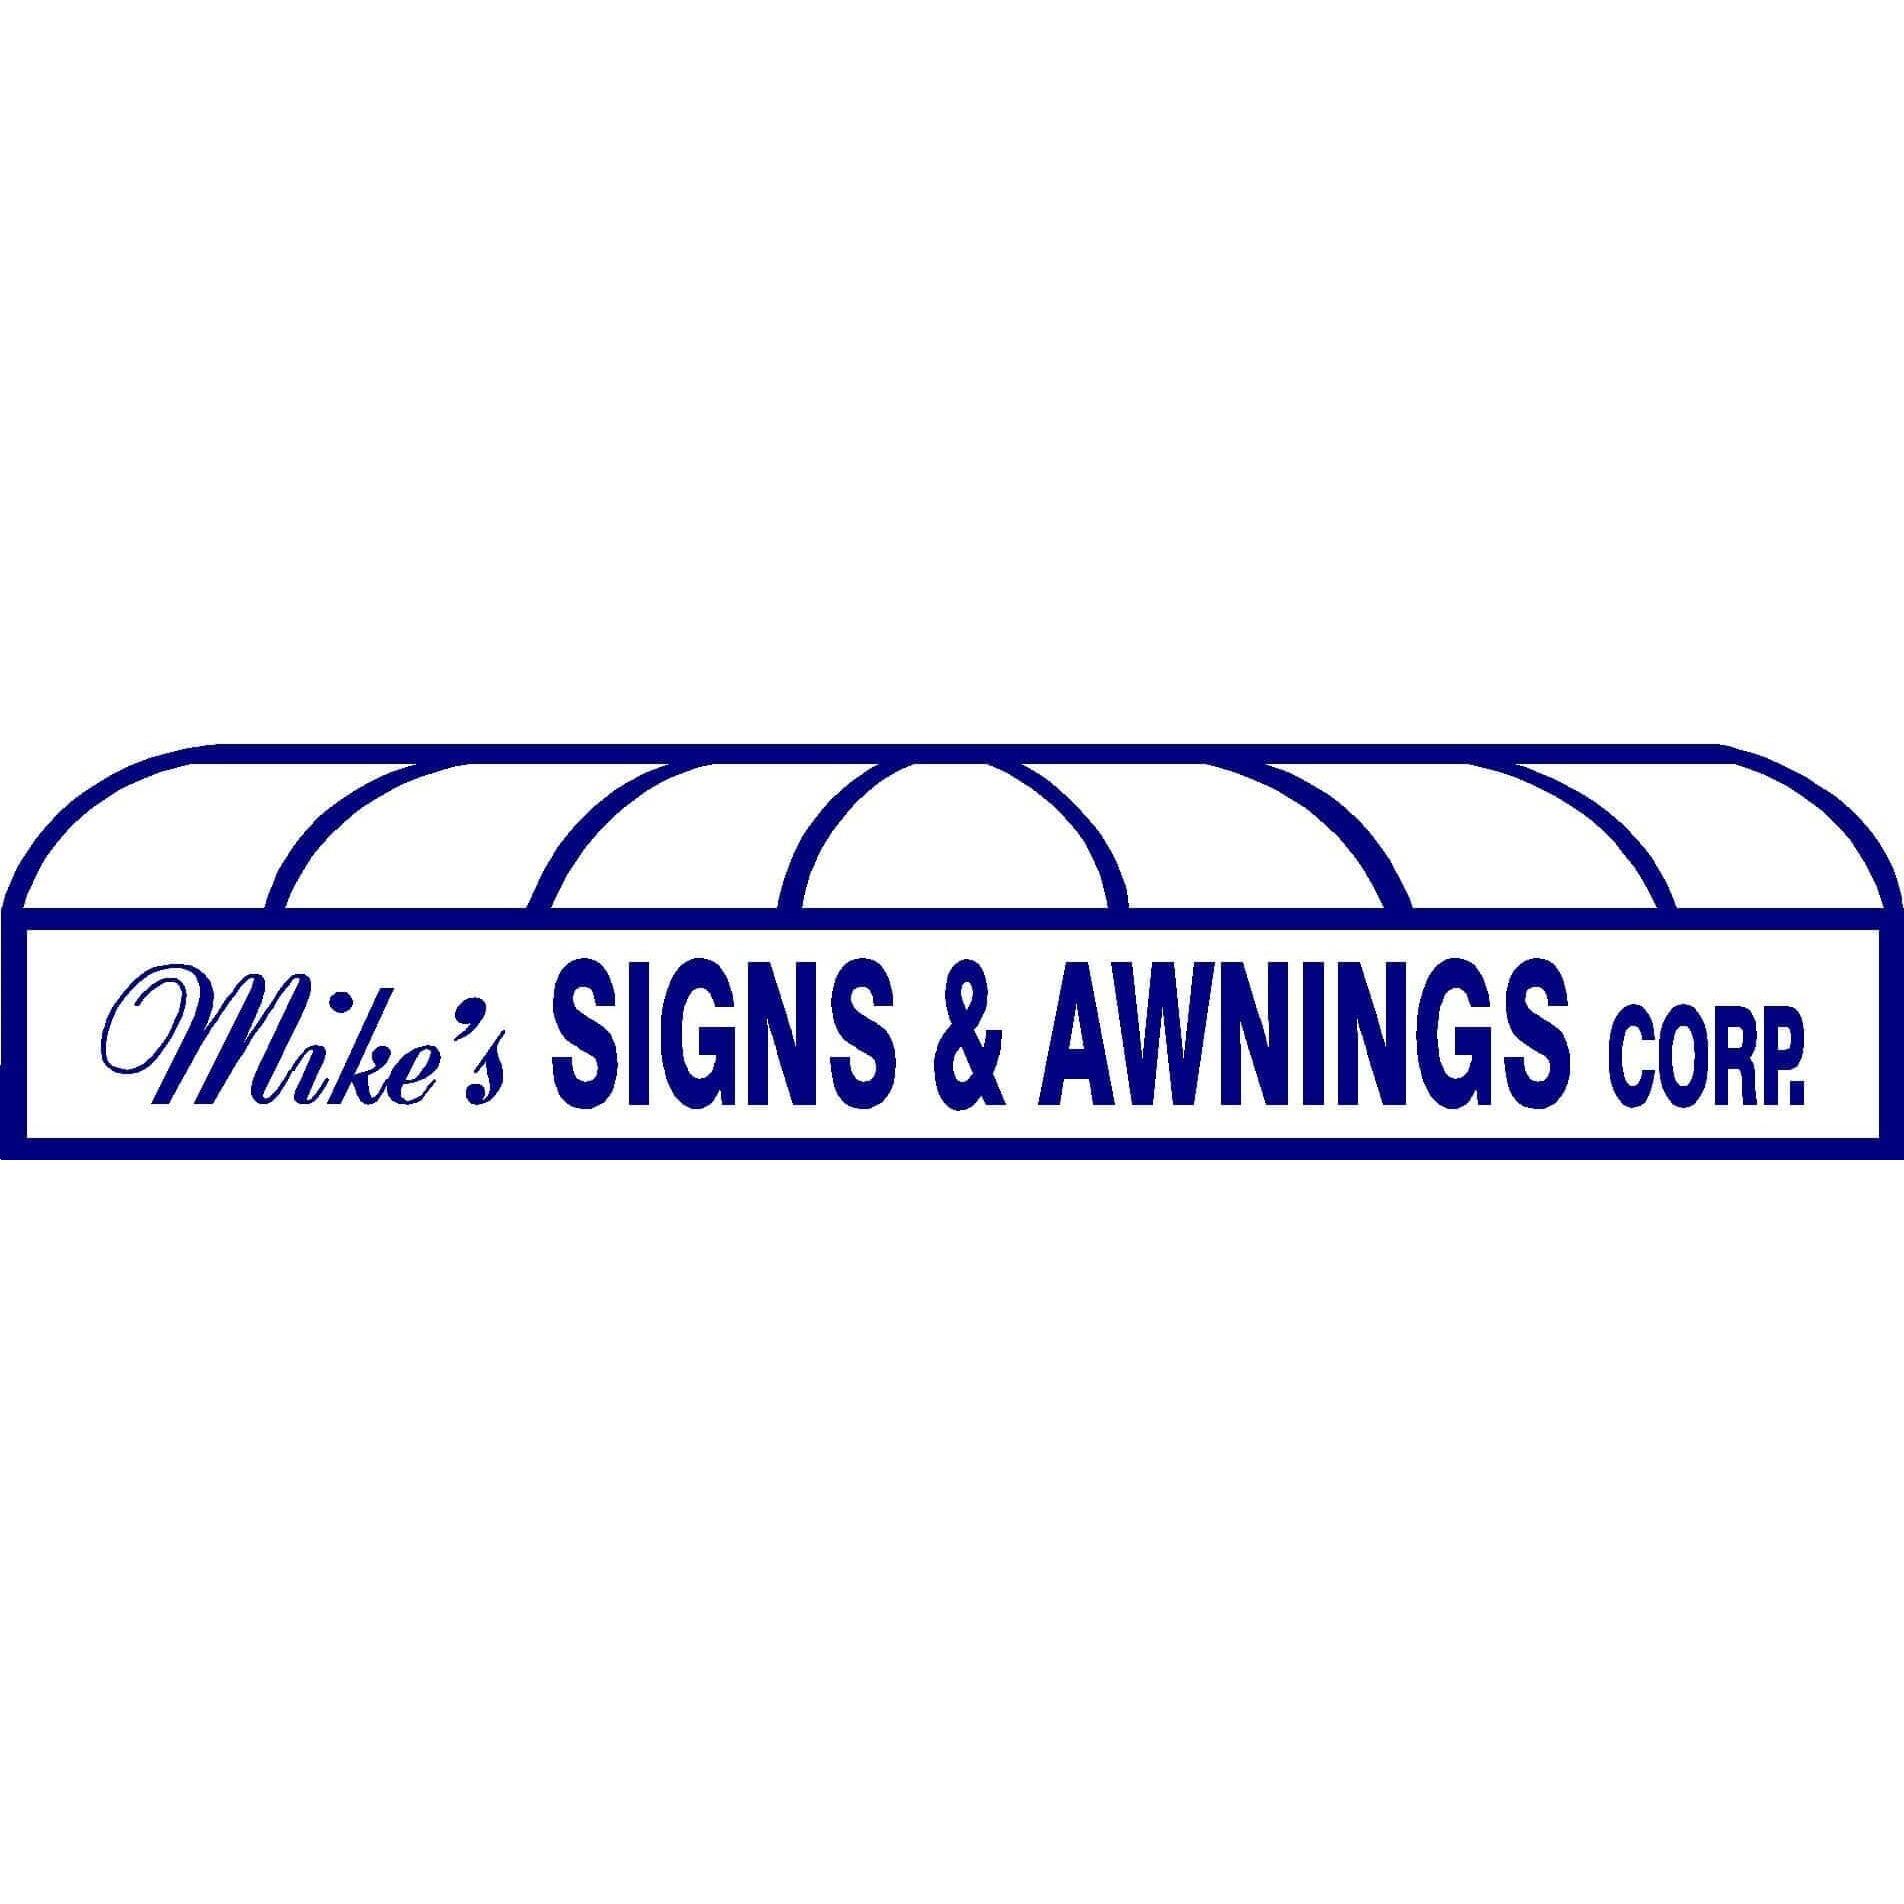 Mike's Signs & Awnings Corp. Photo